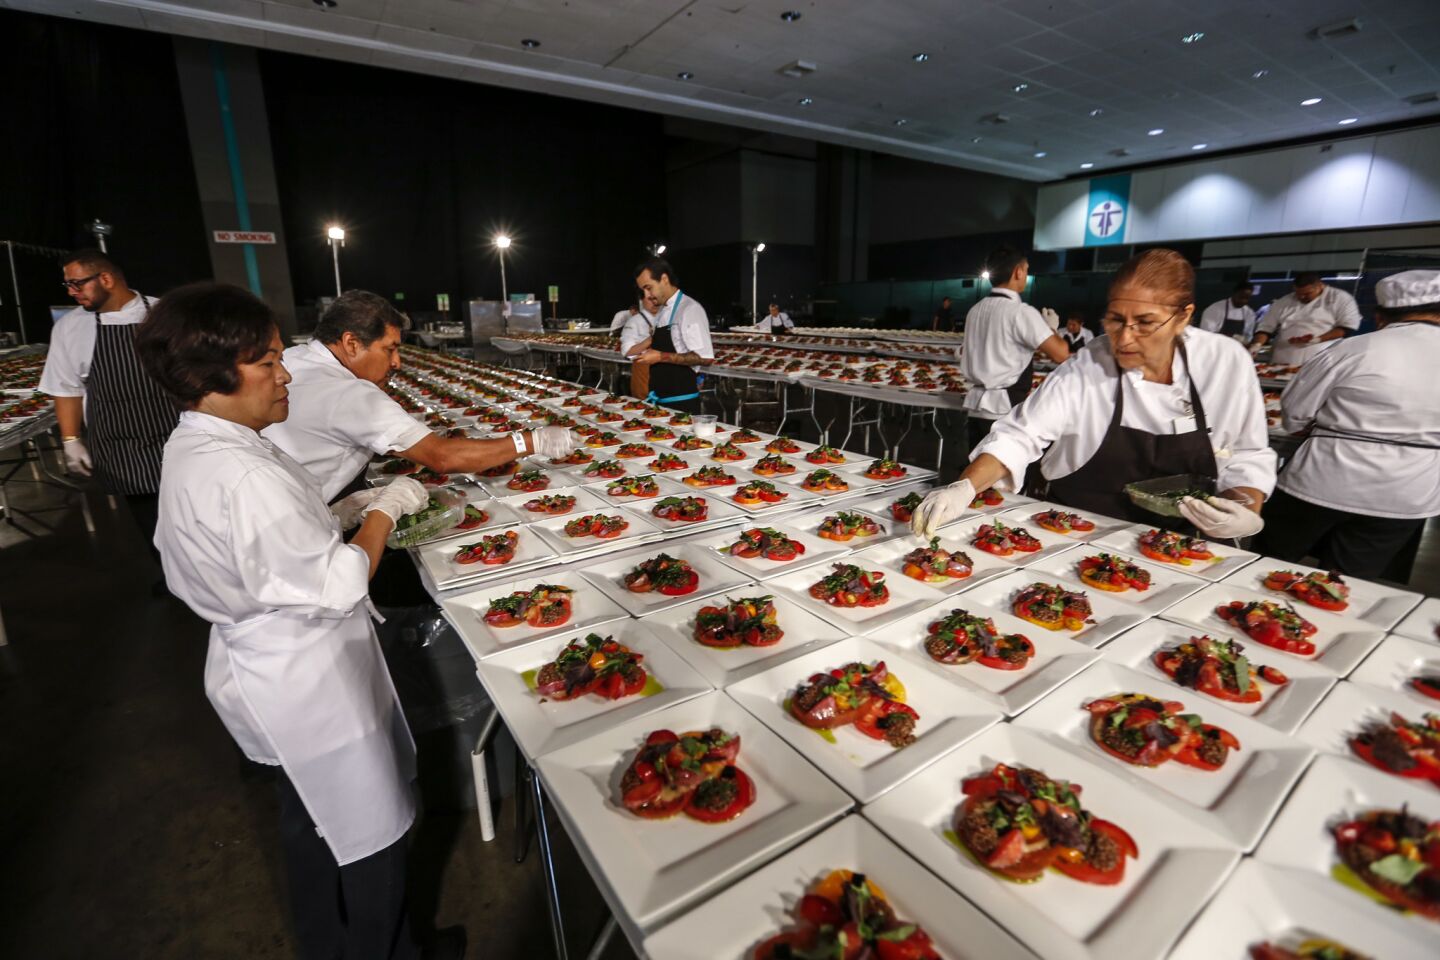 L.A. Kitchen at the Emmys